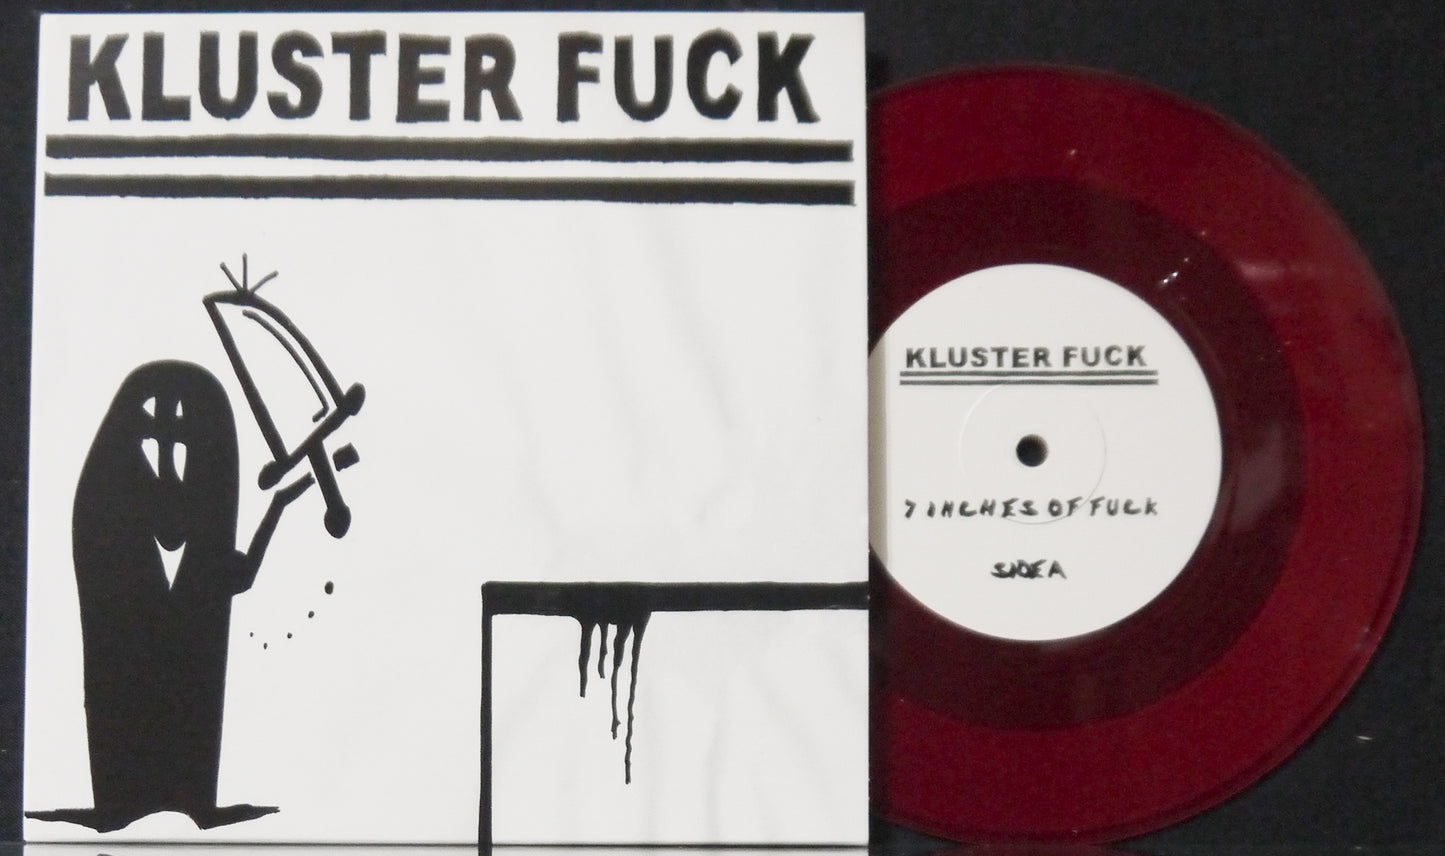 KLUSTER FUCK - 7 Inches Of Fuck 7"